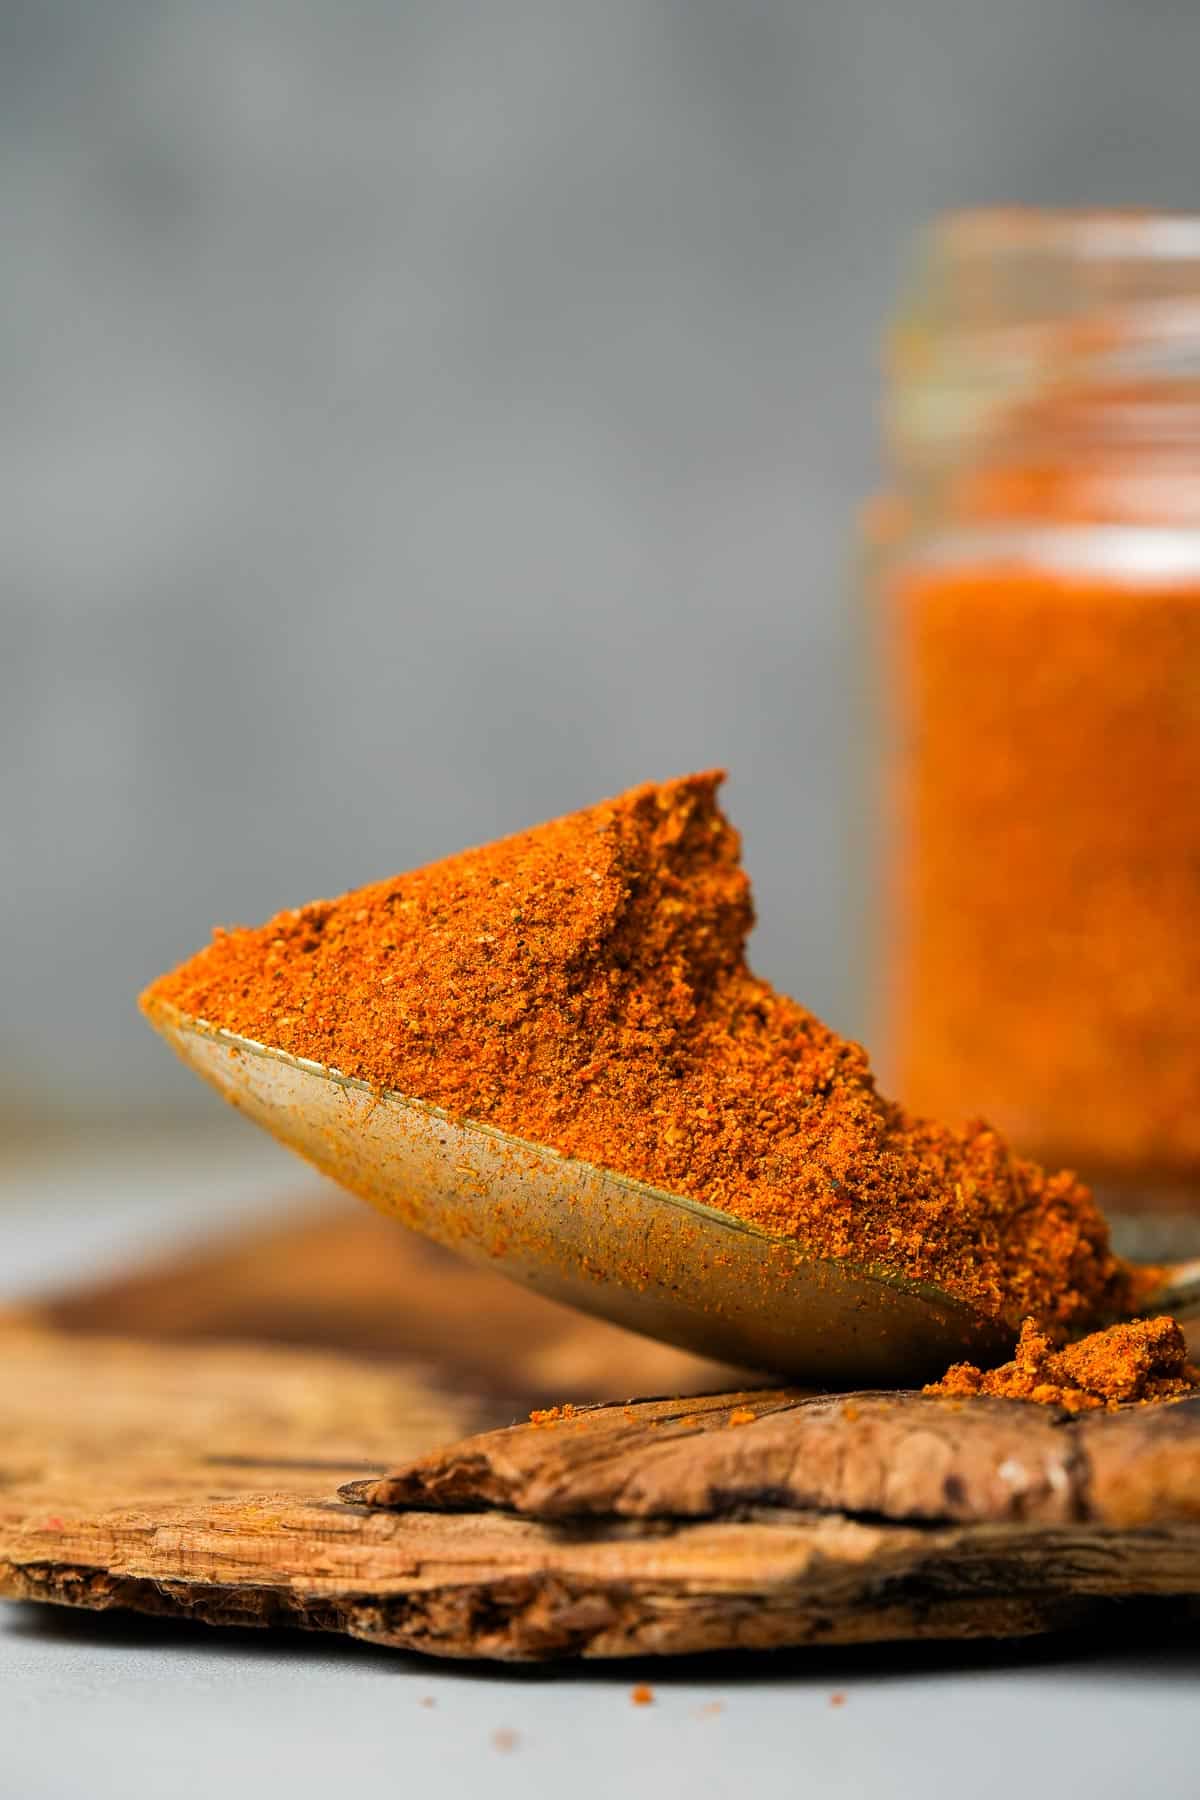 A spoonful of achar masala sitting in front of a jar of spice.